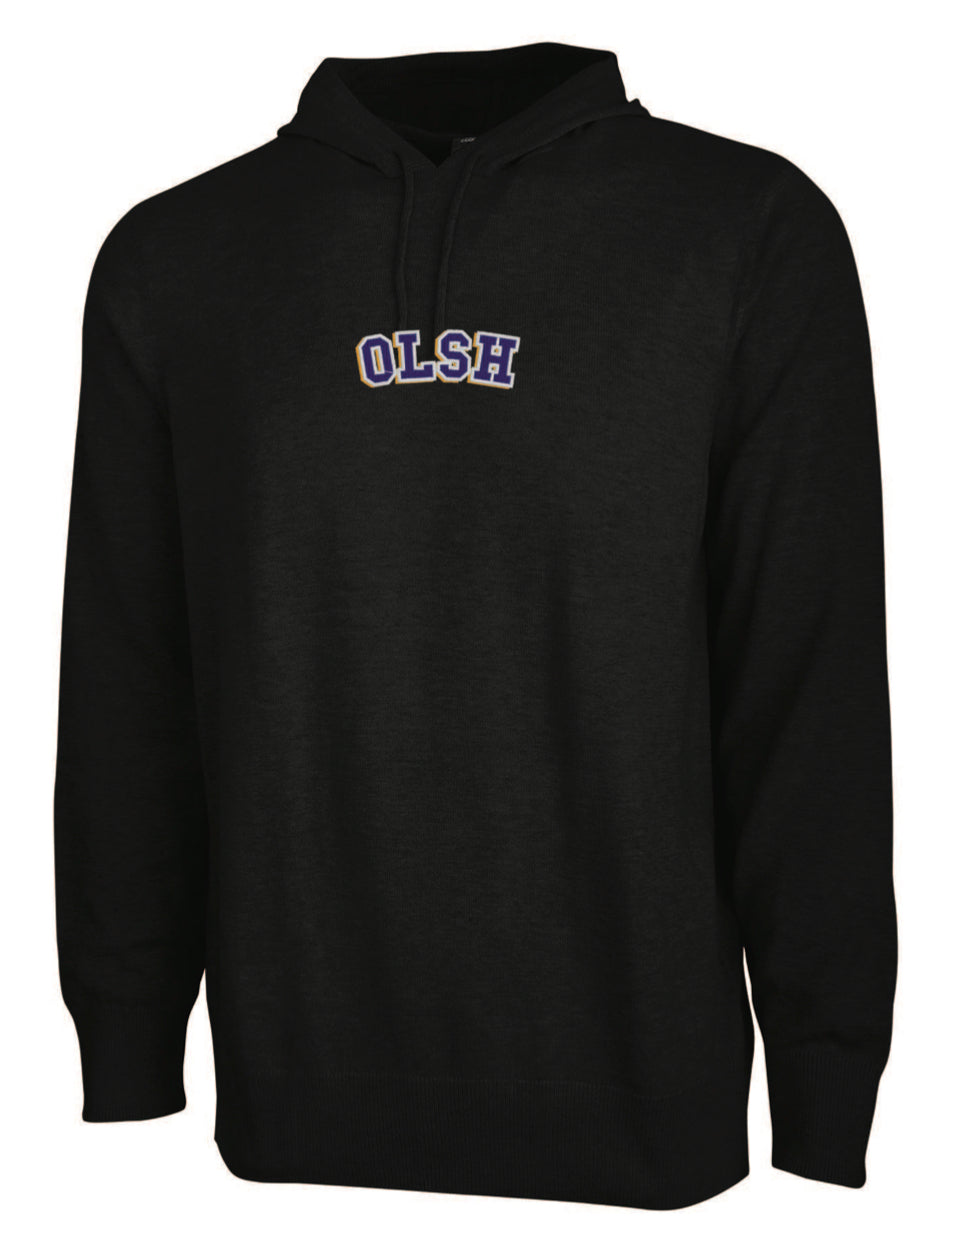 OLSH EMBROIDERED KNIT HOODED SWEATER